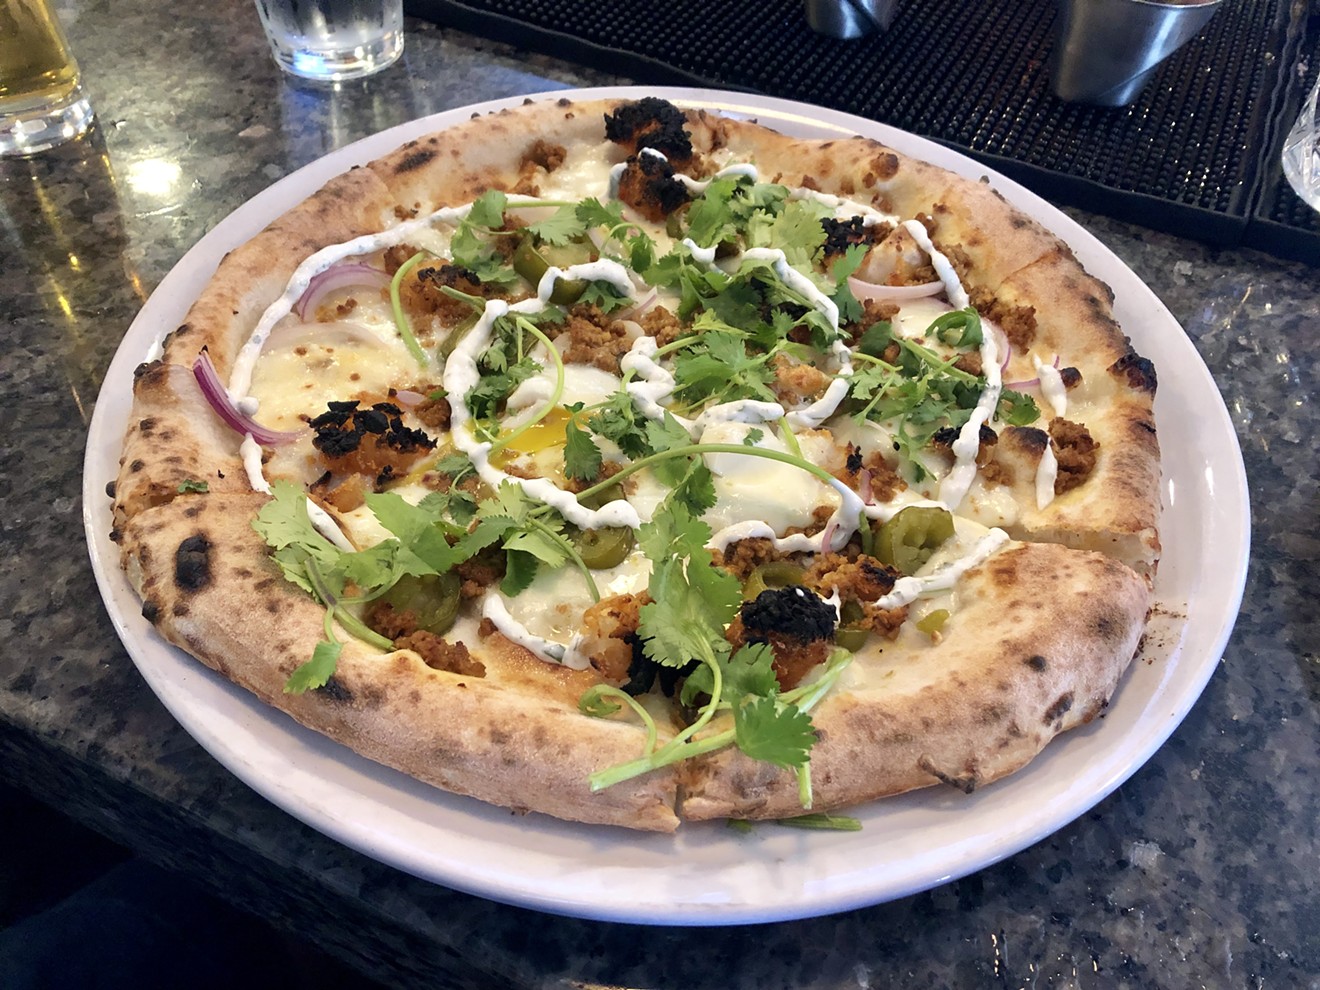 The breakfast taco pizza ($16) at Cane Rosso in Deep Ellum